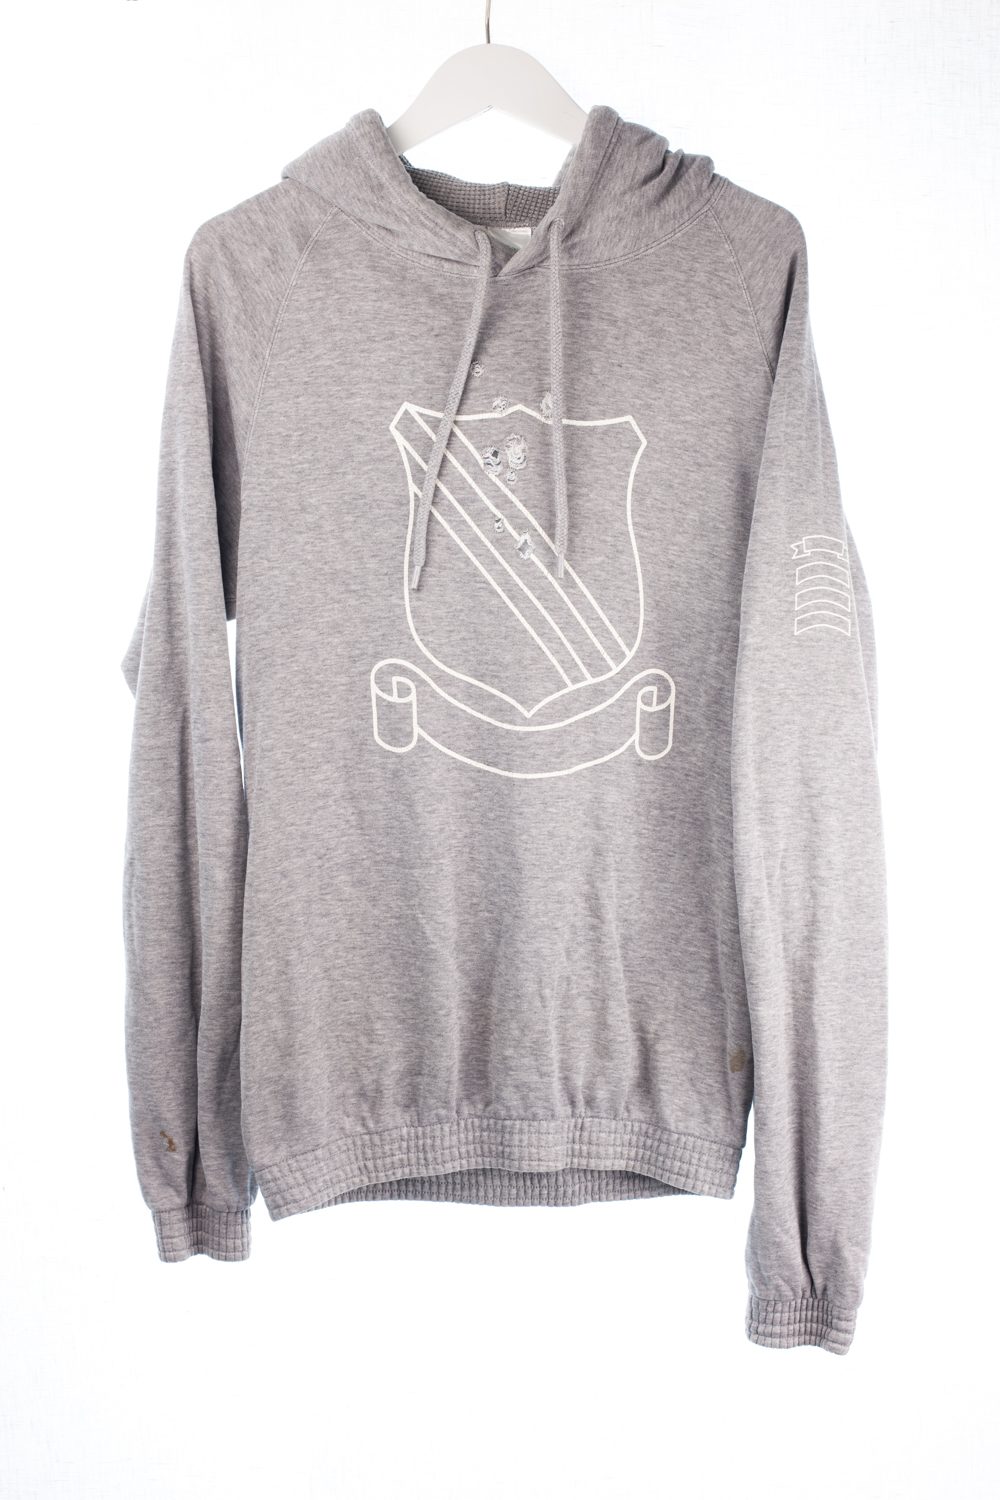 White Label Distressed Shield Hoodie